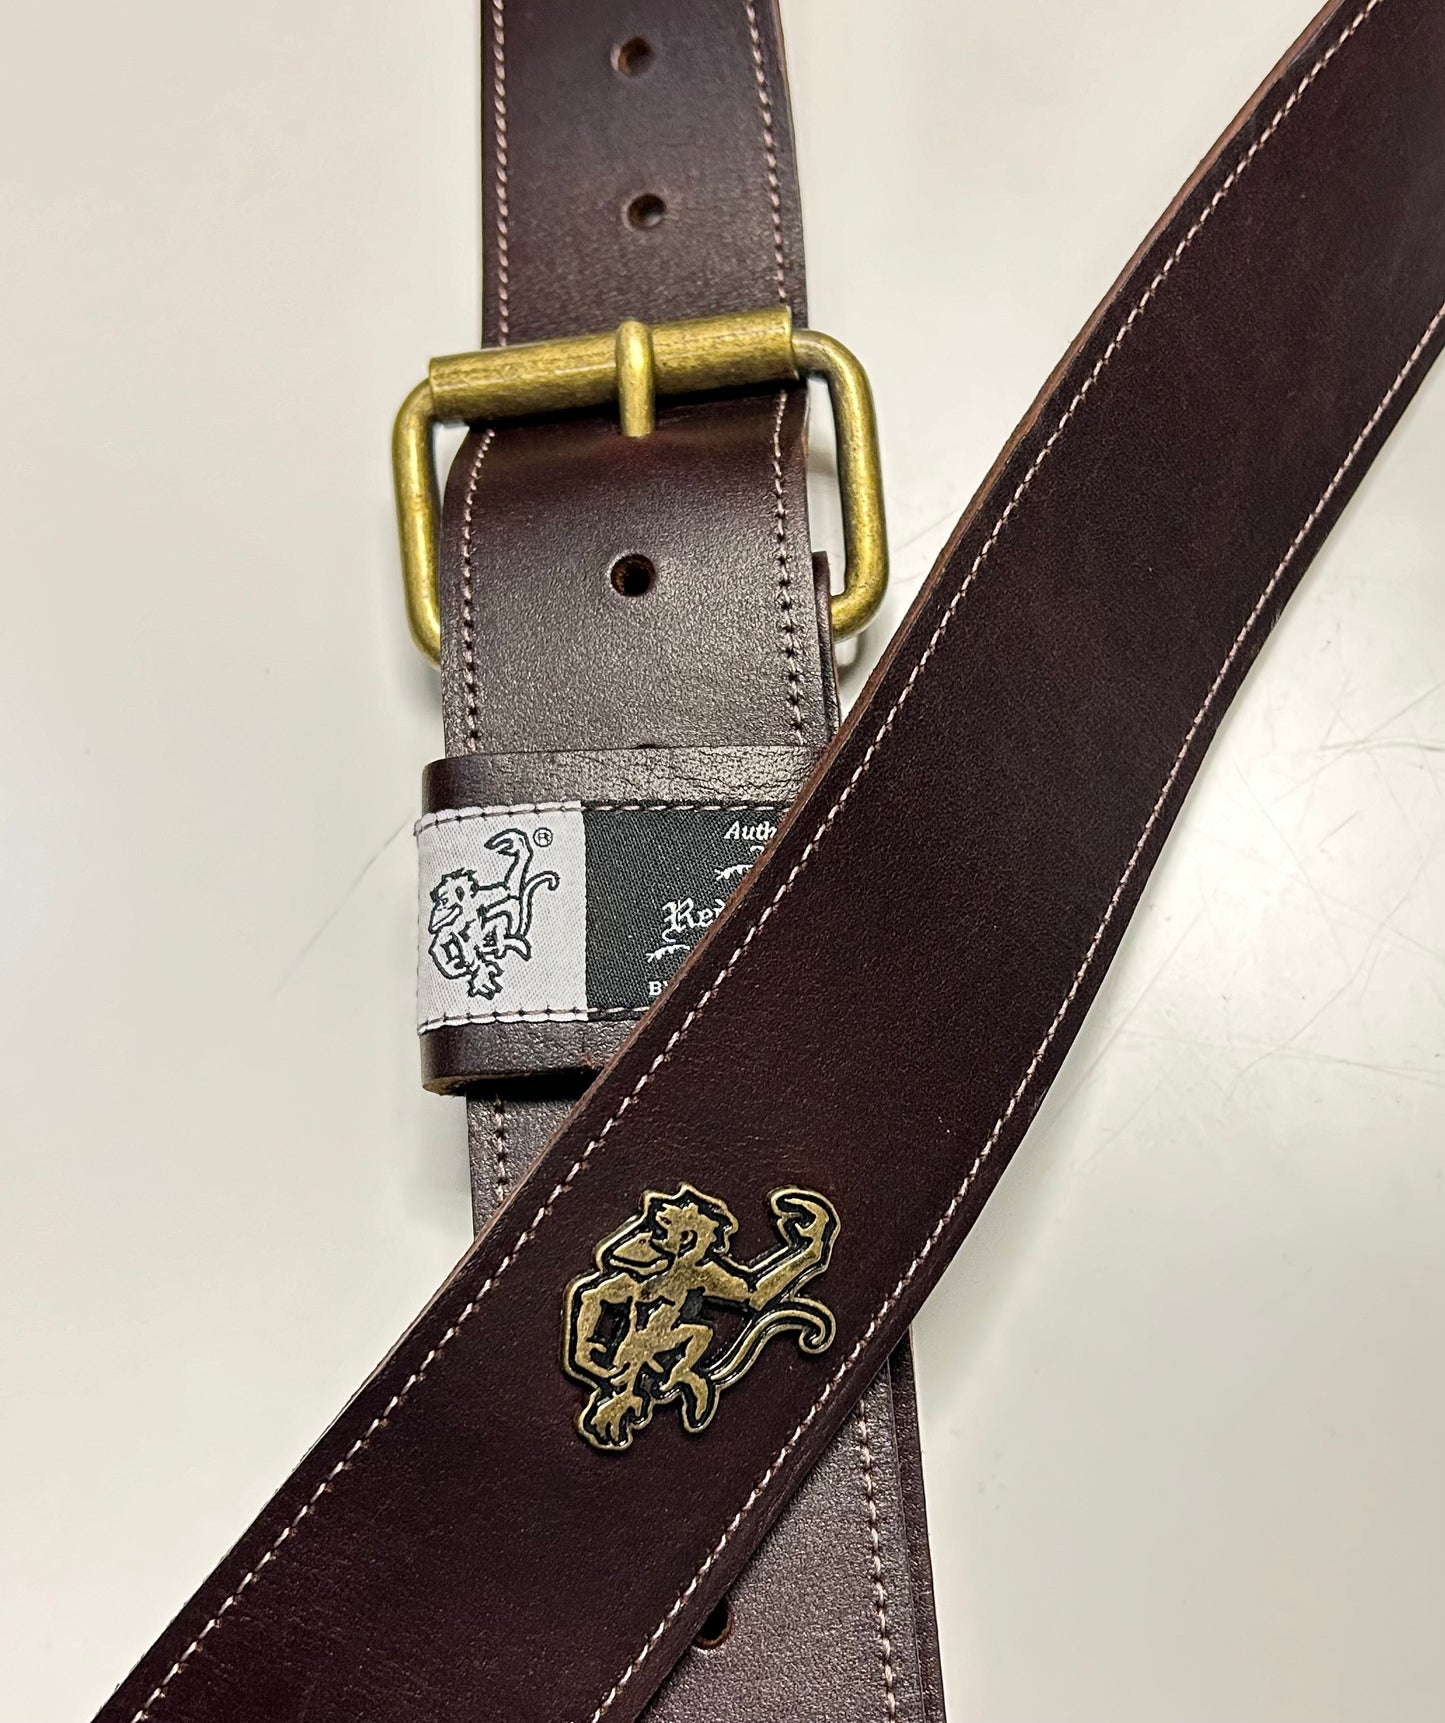 Red Monkey Designs 2" Classic Guitar Strap (Chocolate/Antique Brass, Size:2)